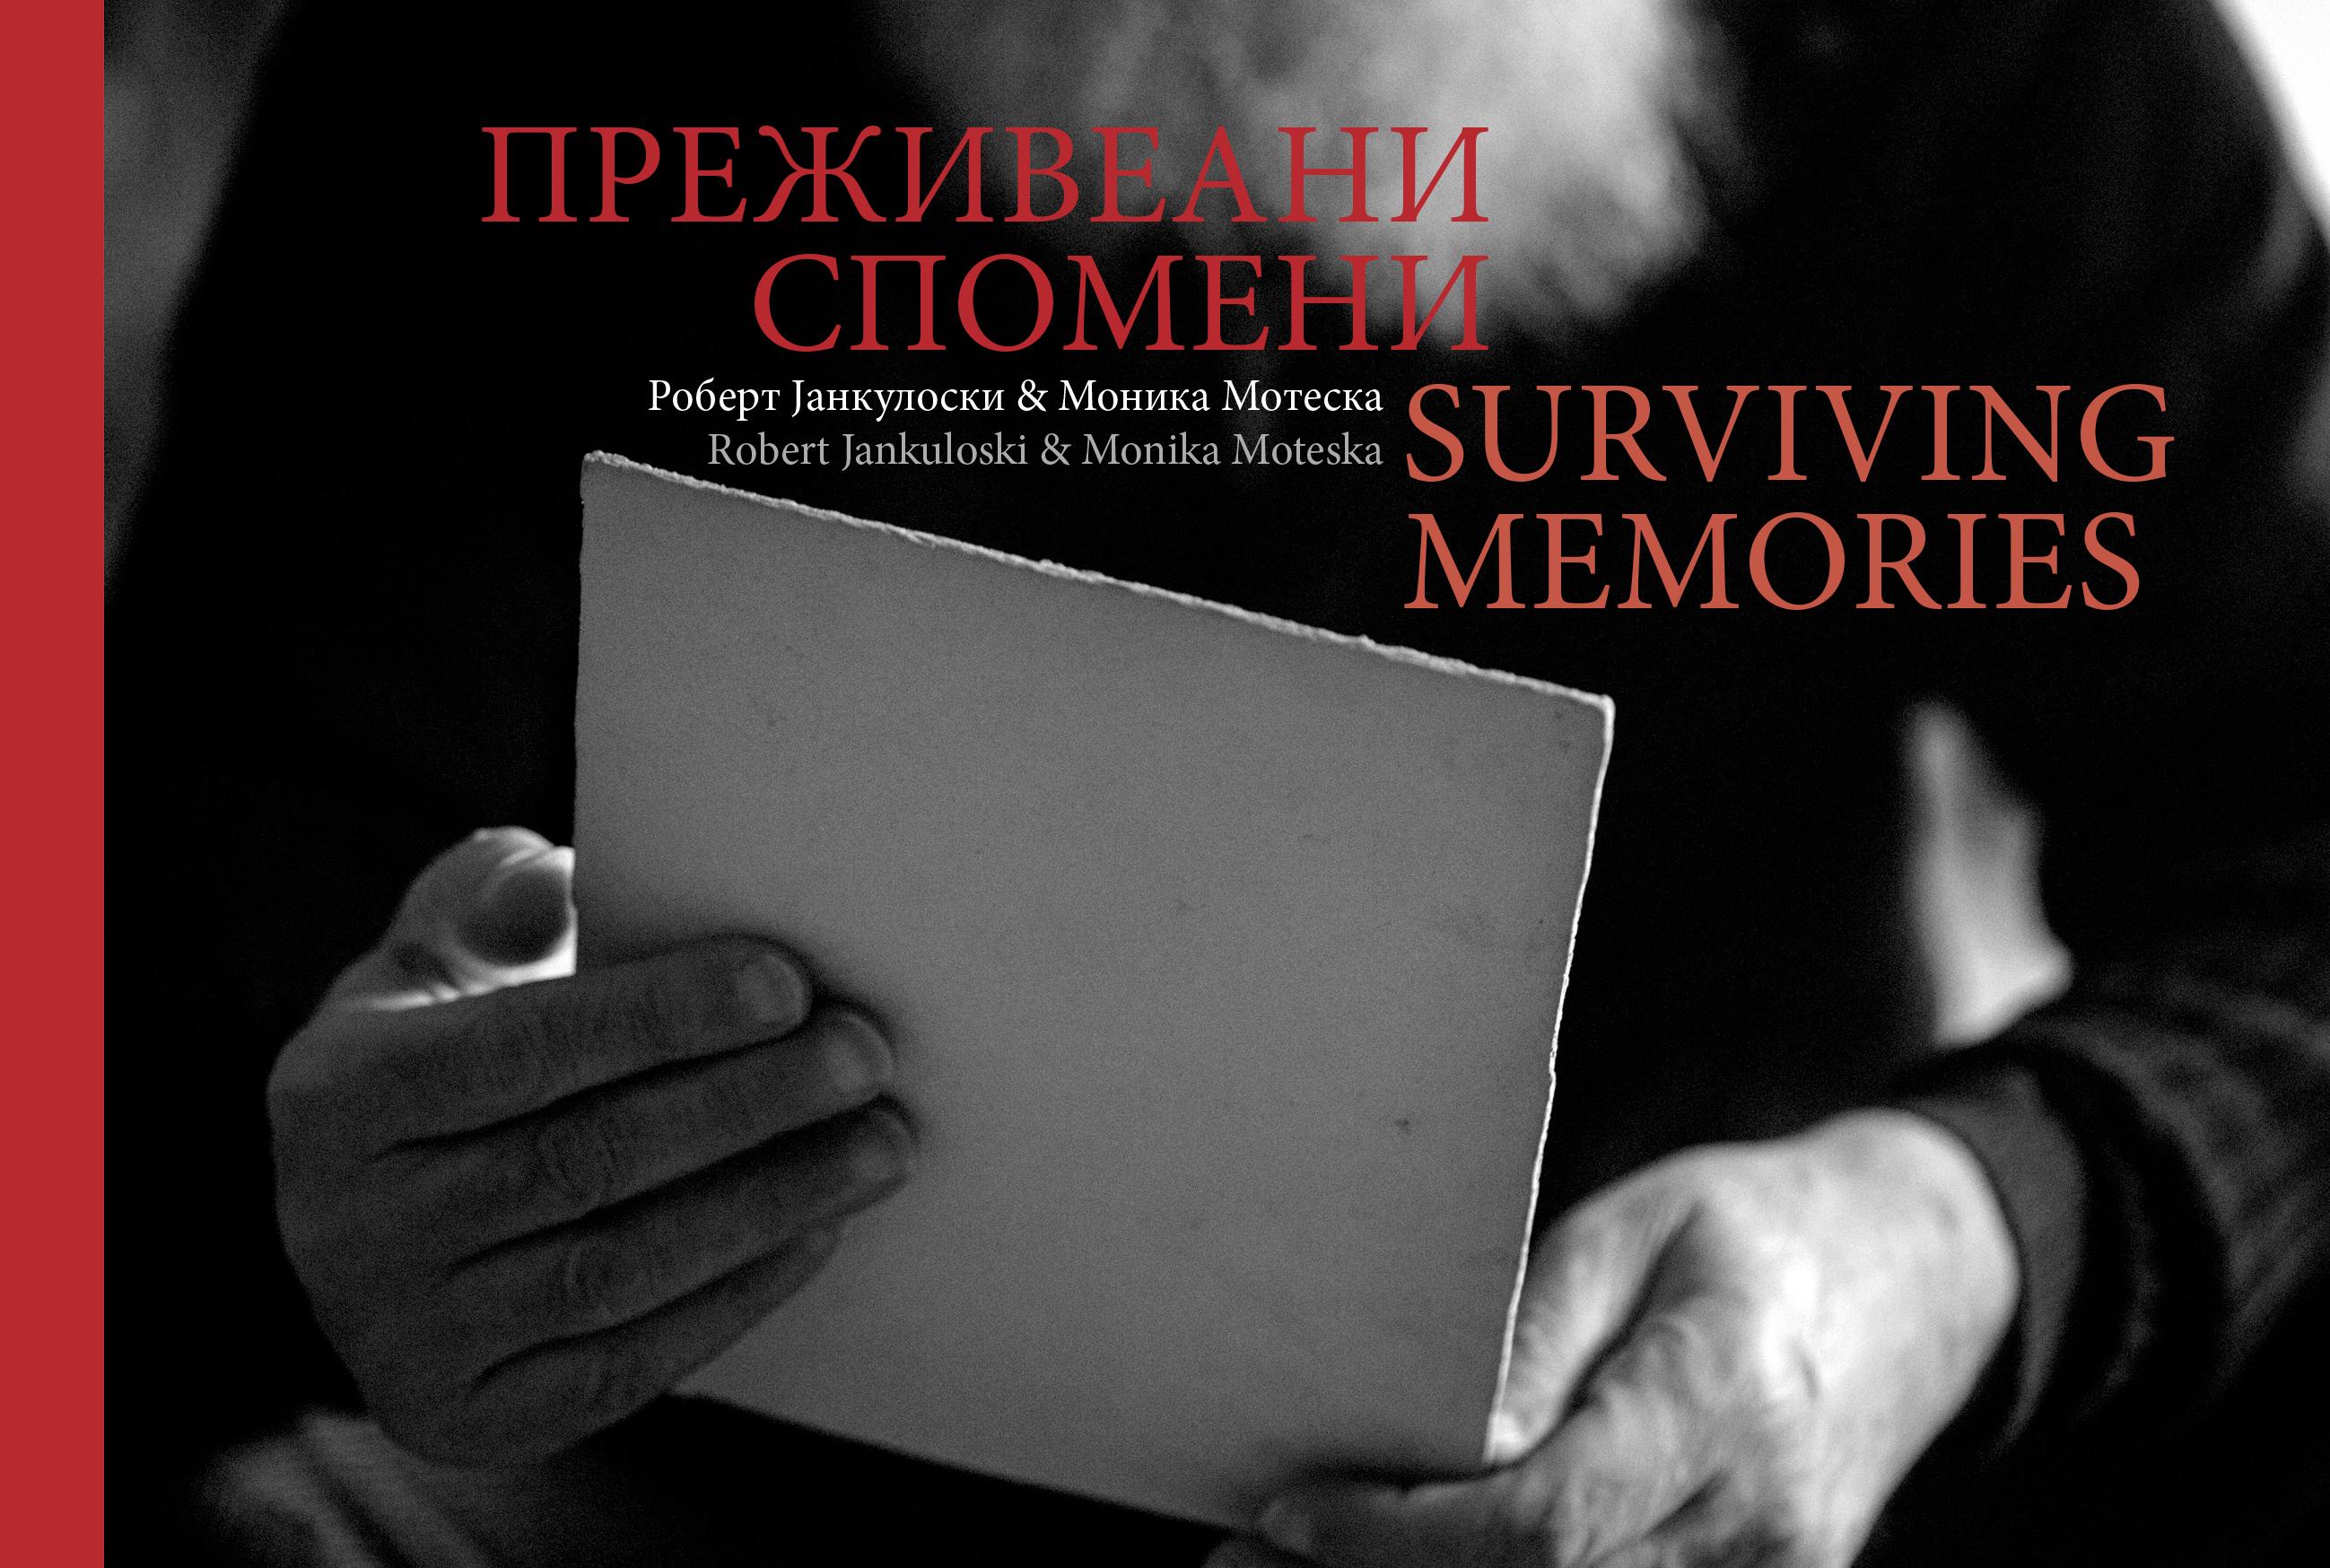 СЕЌАВАЊА / REMEMBERING